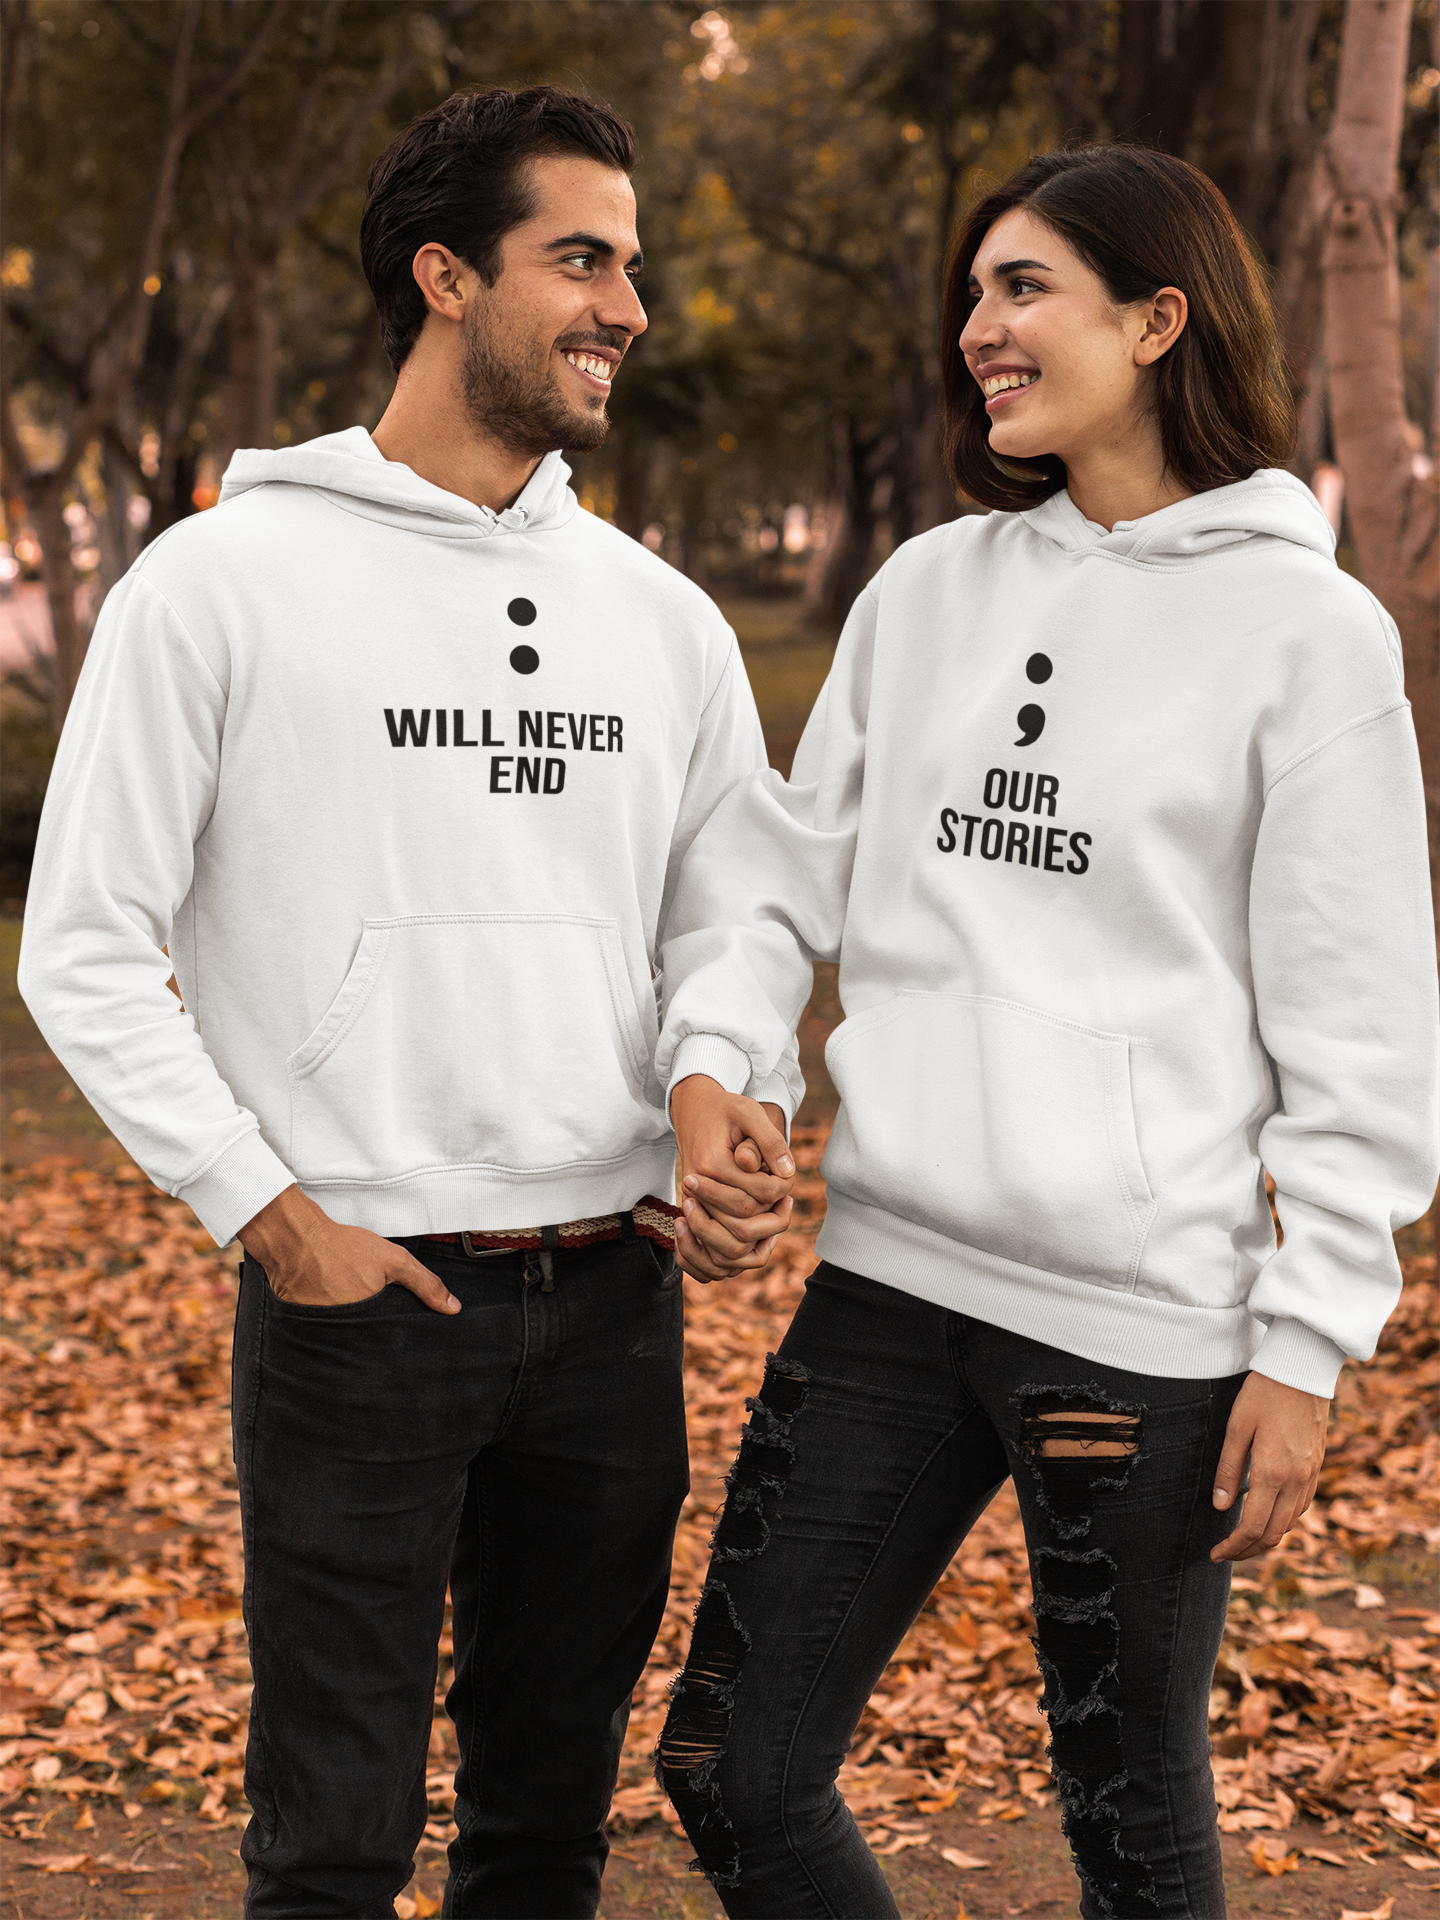 Our Stories Couple Hoodie-FunkyTradition